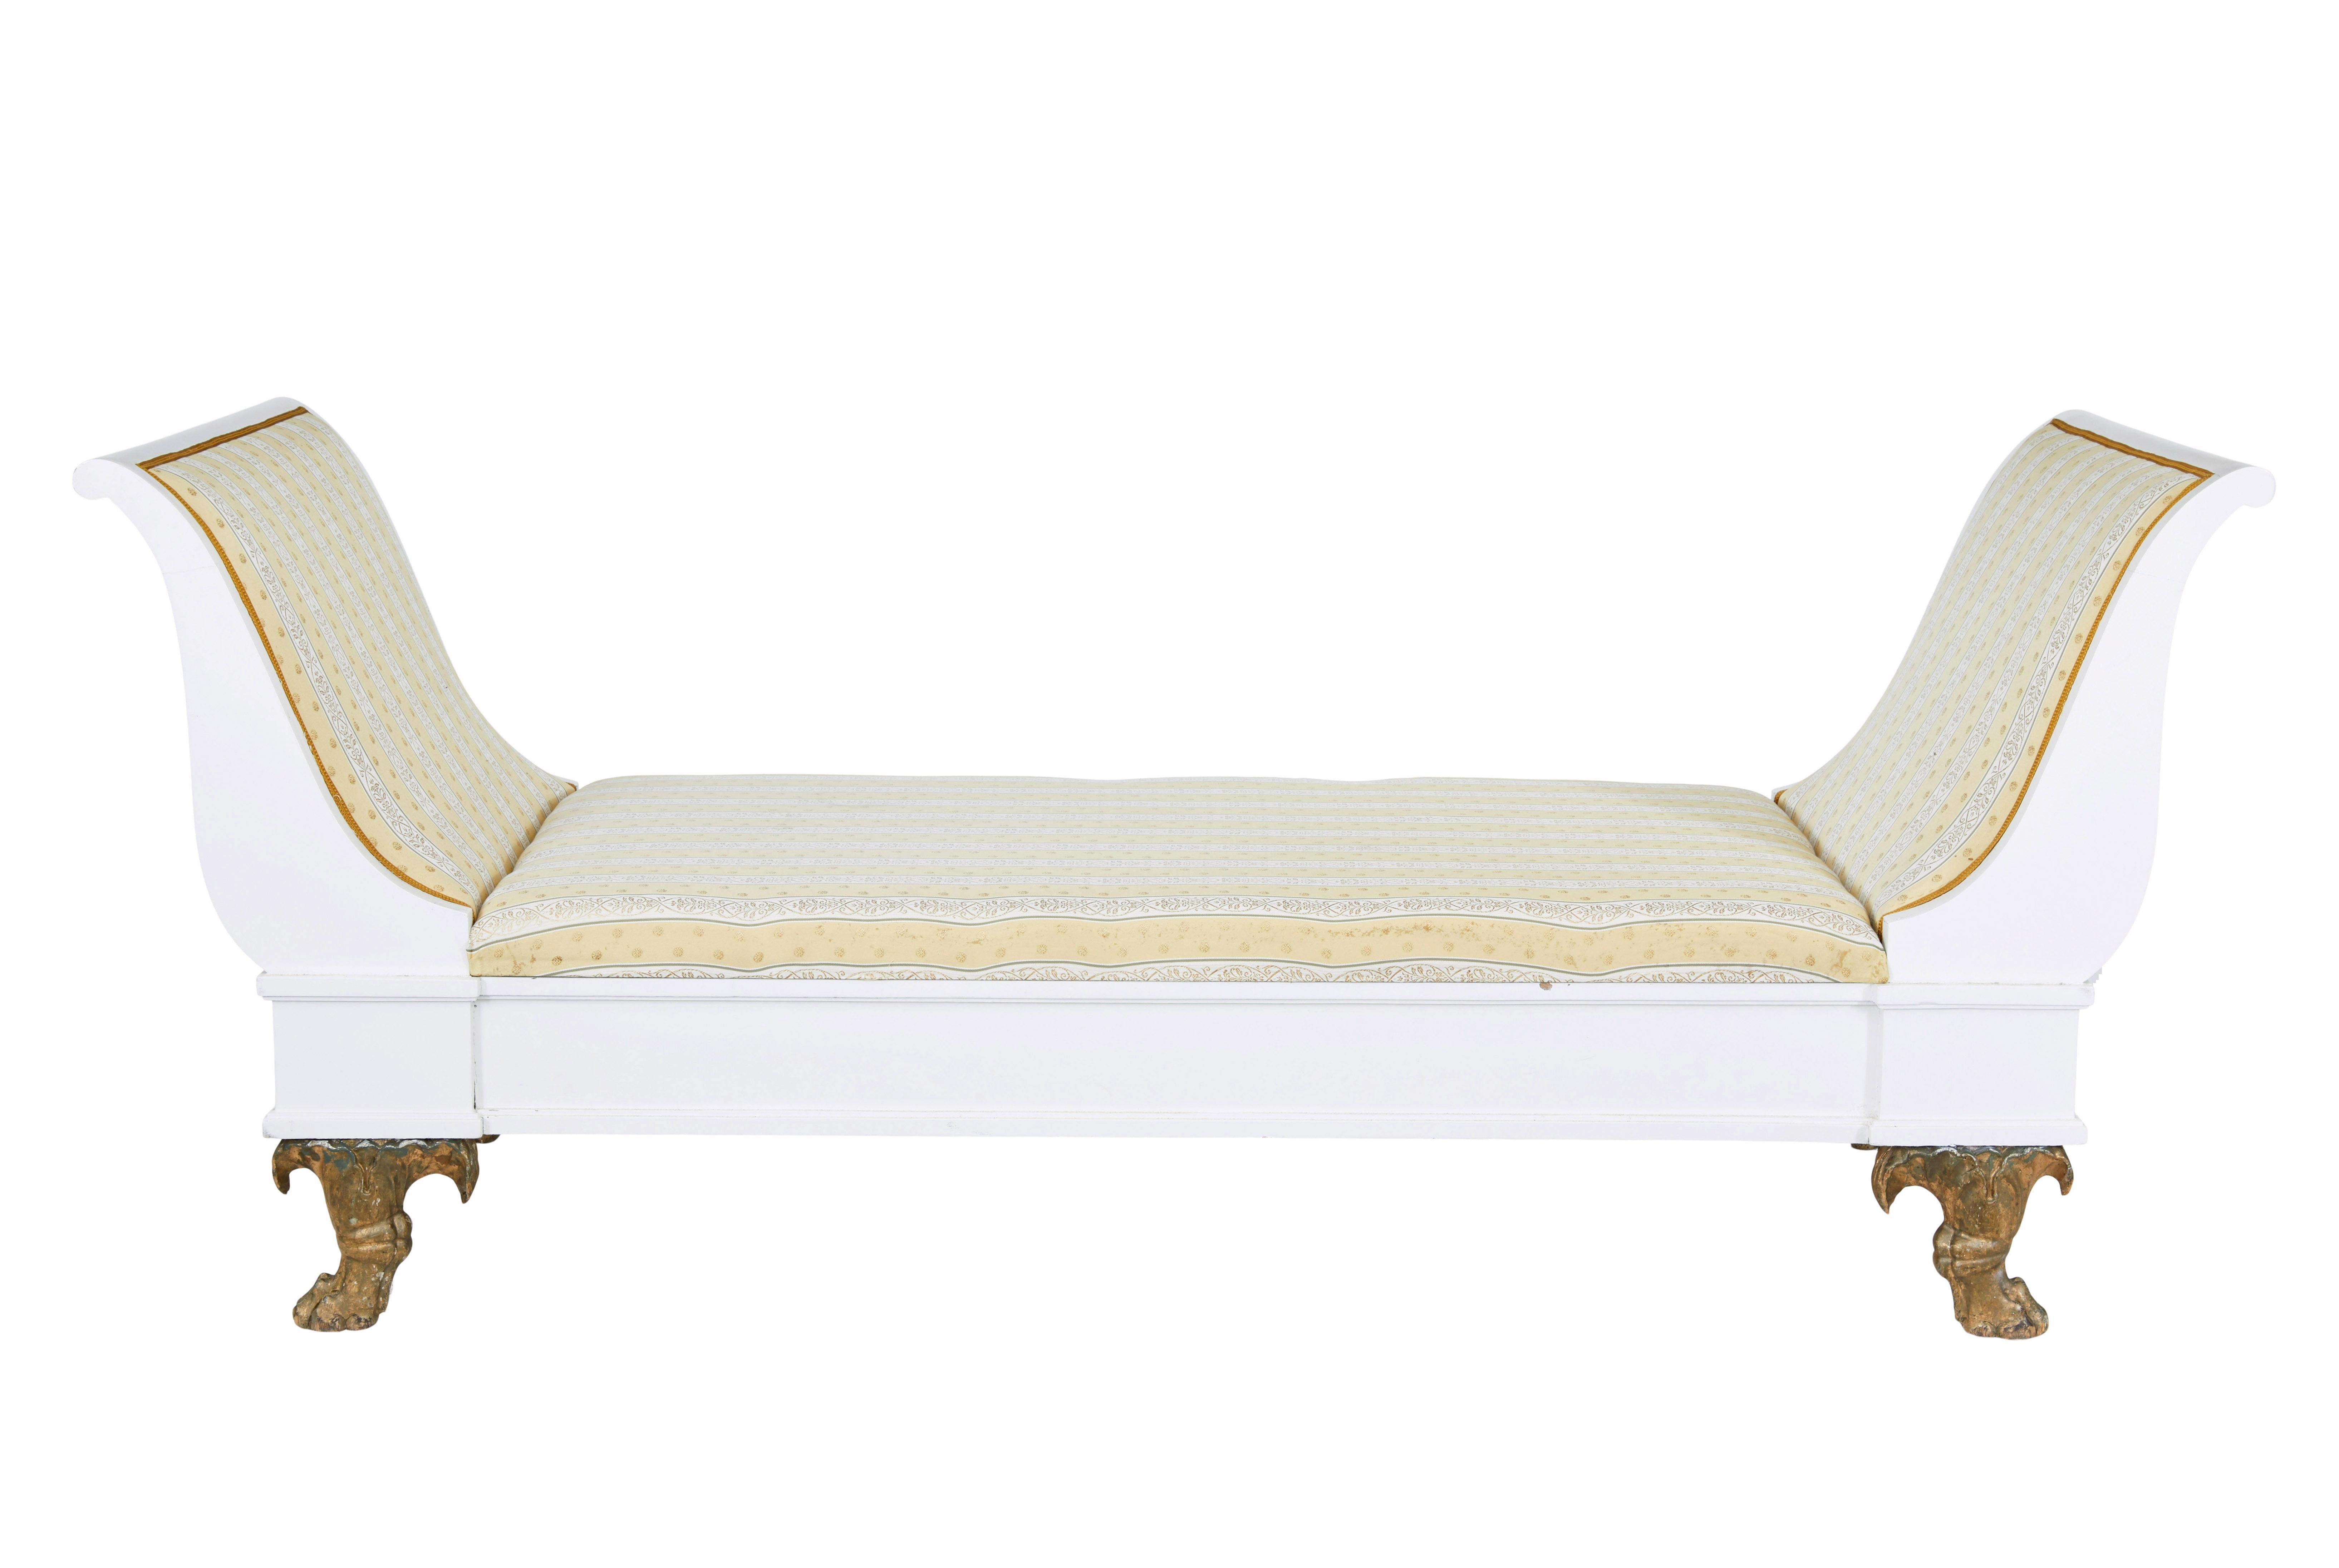 Early 20th century empire revival painted scandinavian day bed circa 1900.

Grand sized swedish day bed featuring scrolled end supports.  Pine frame has been later painted white, standing on carved paw feet with original gilt and traces of original